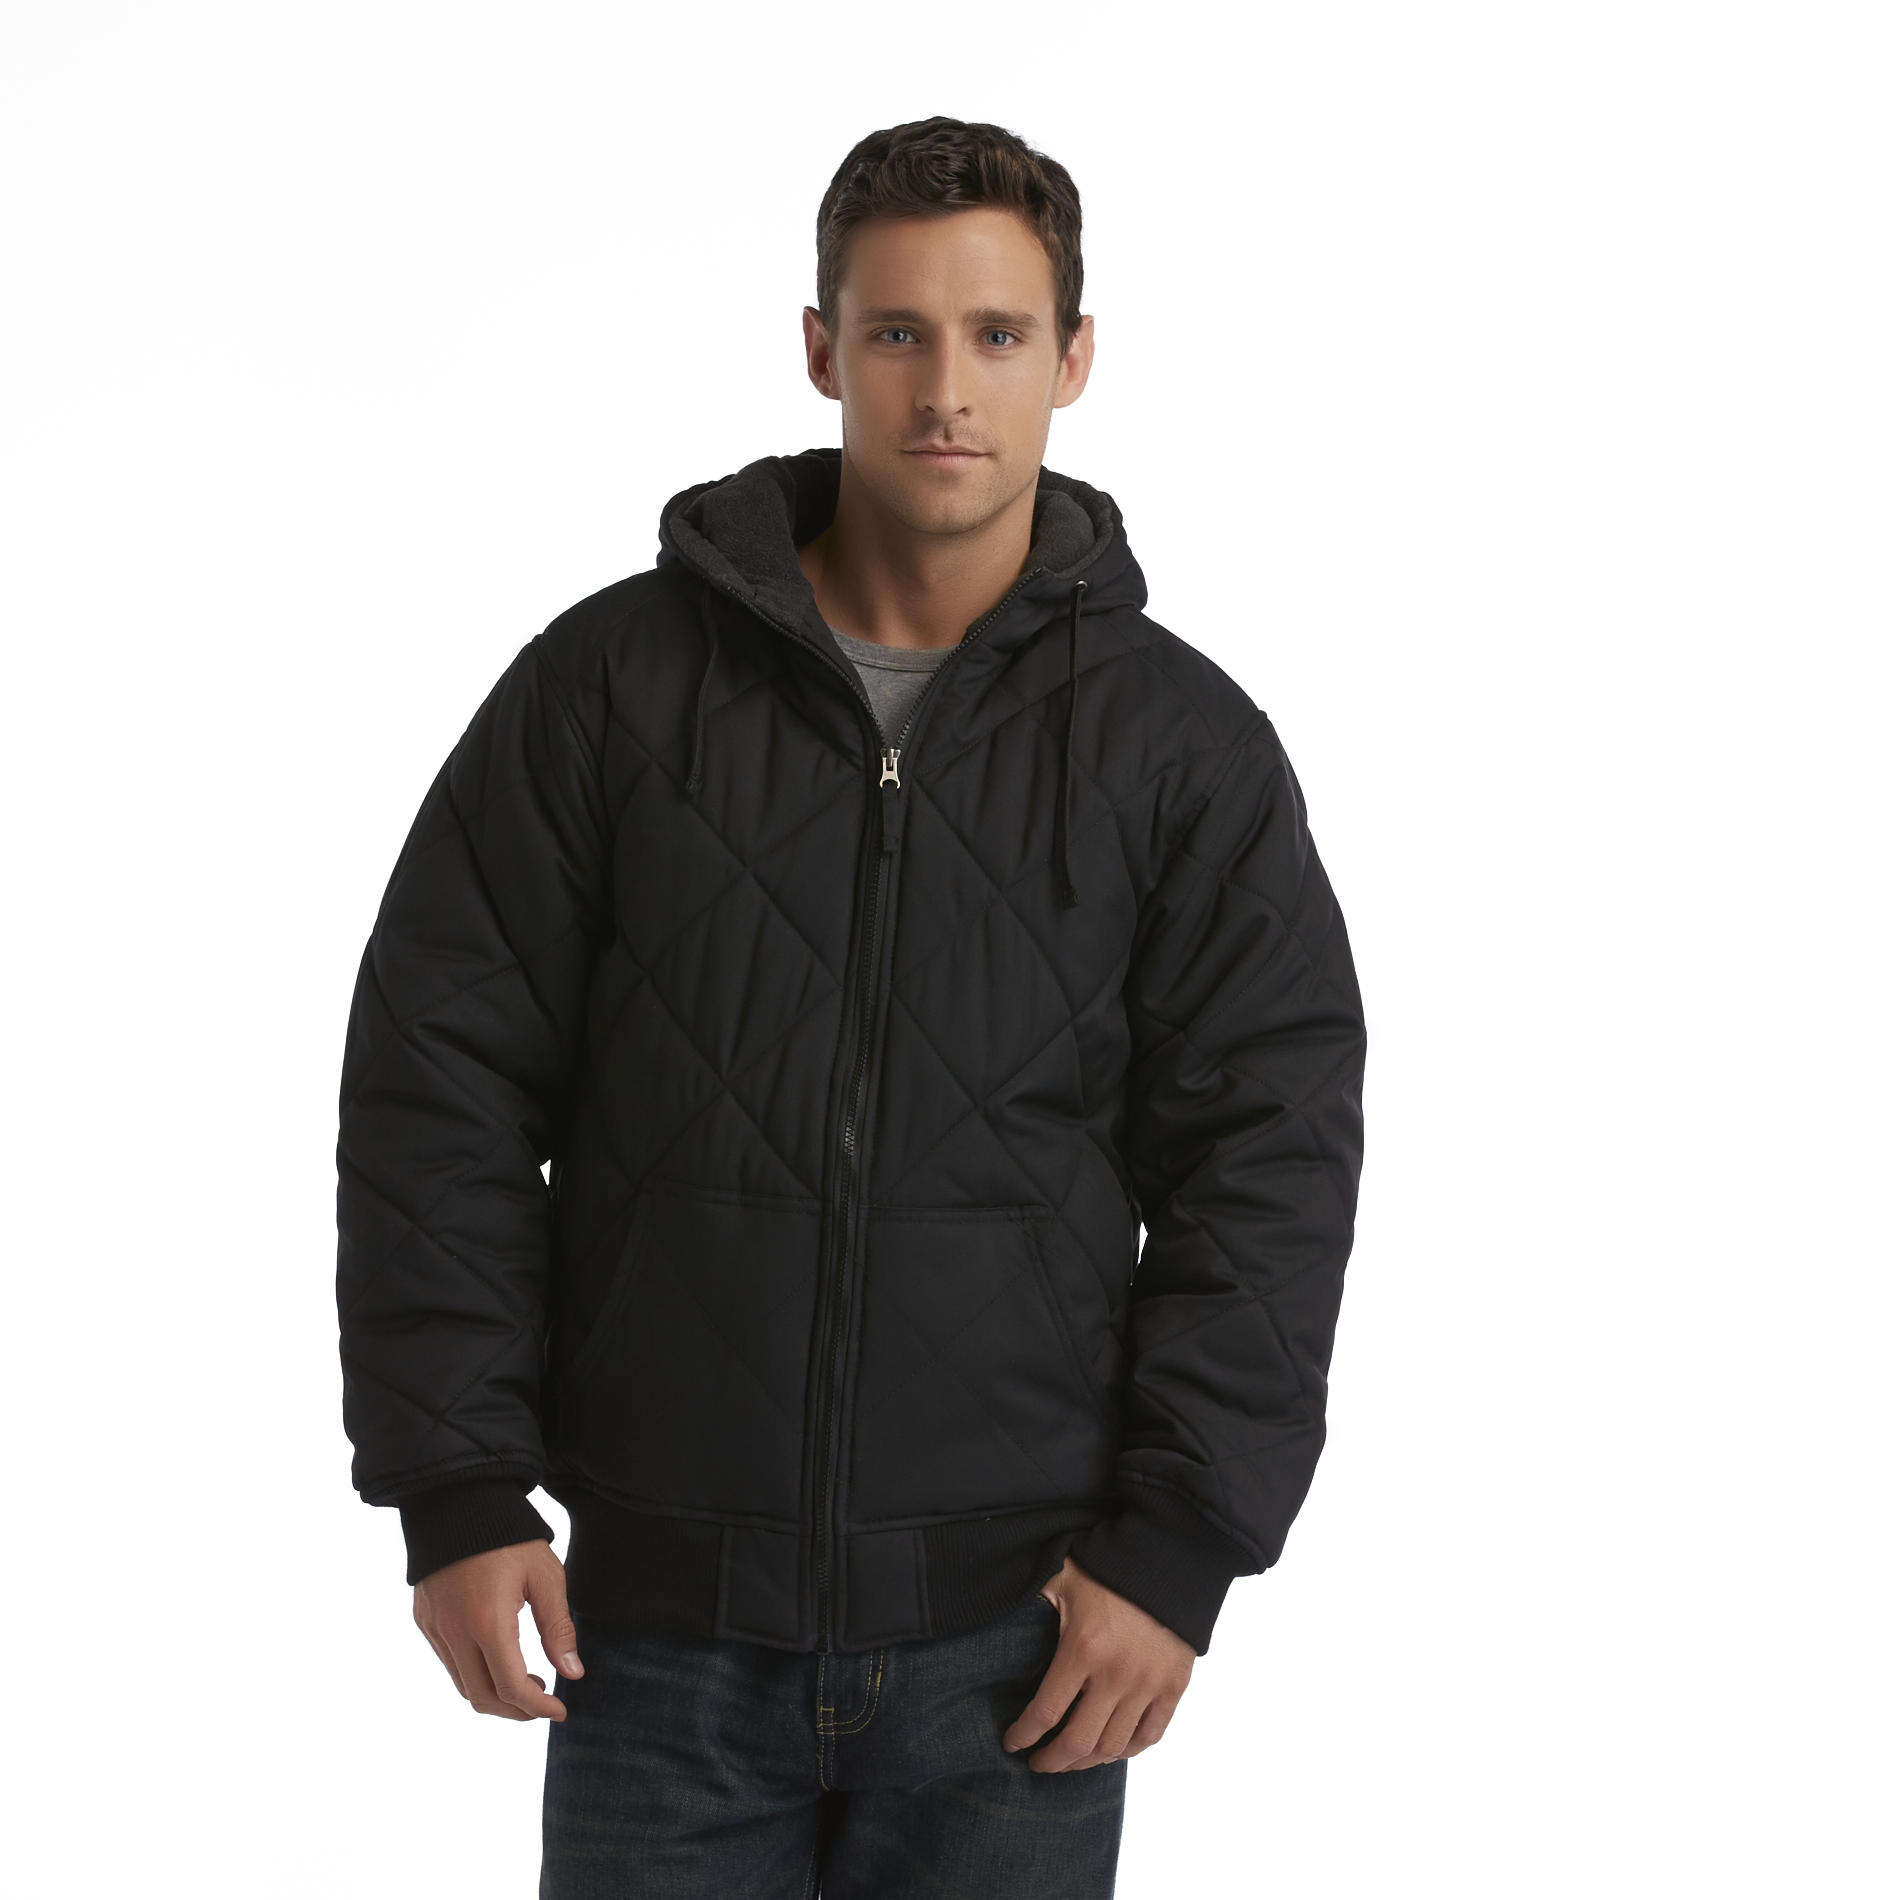 Mens Outerwear: Find Coats And Jackets For Men at Kmart